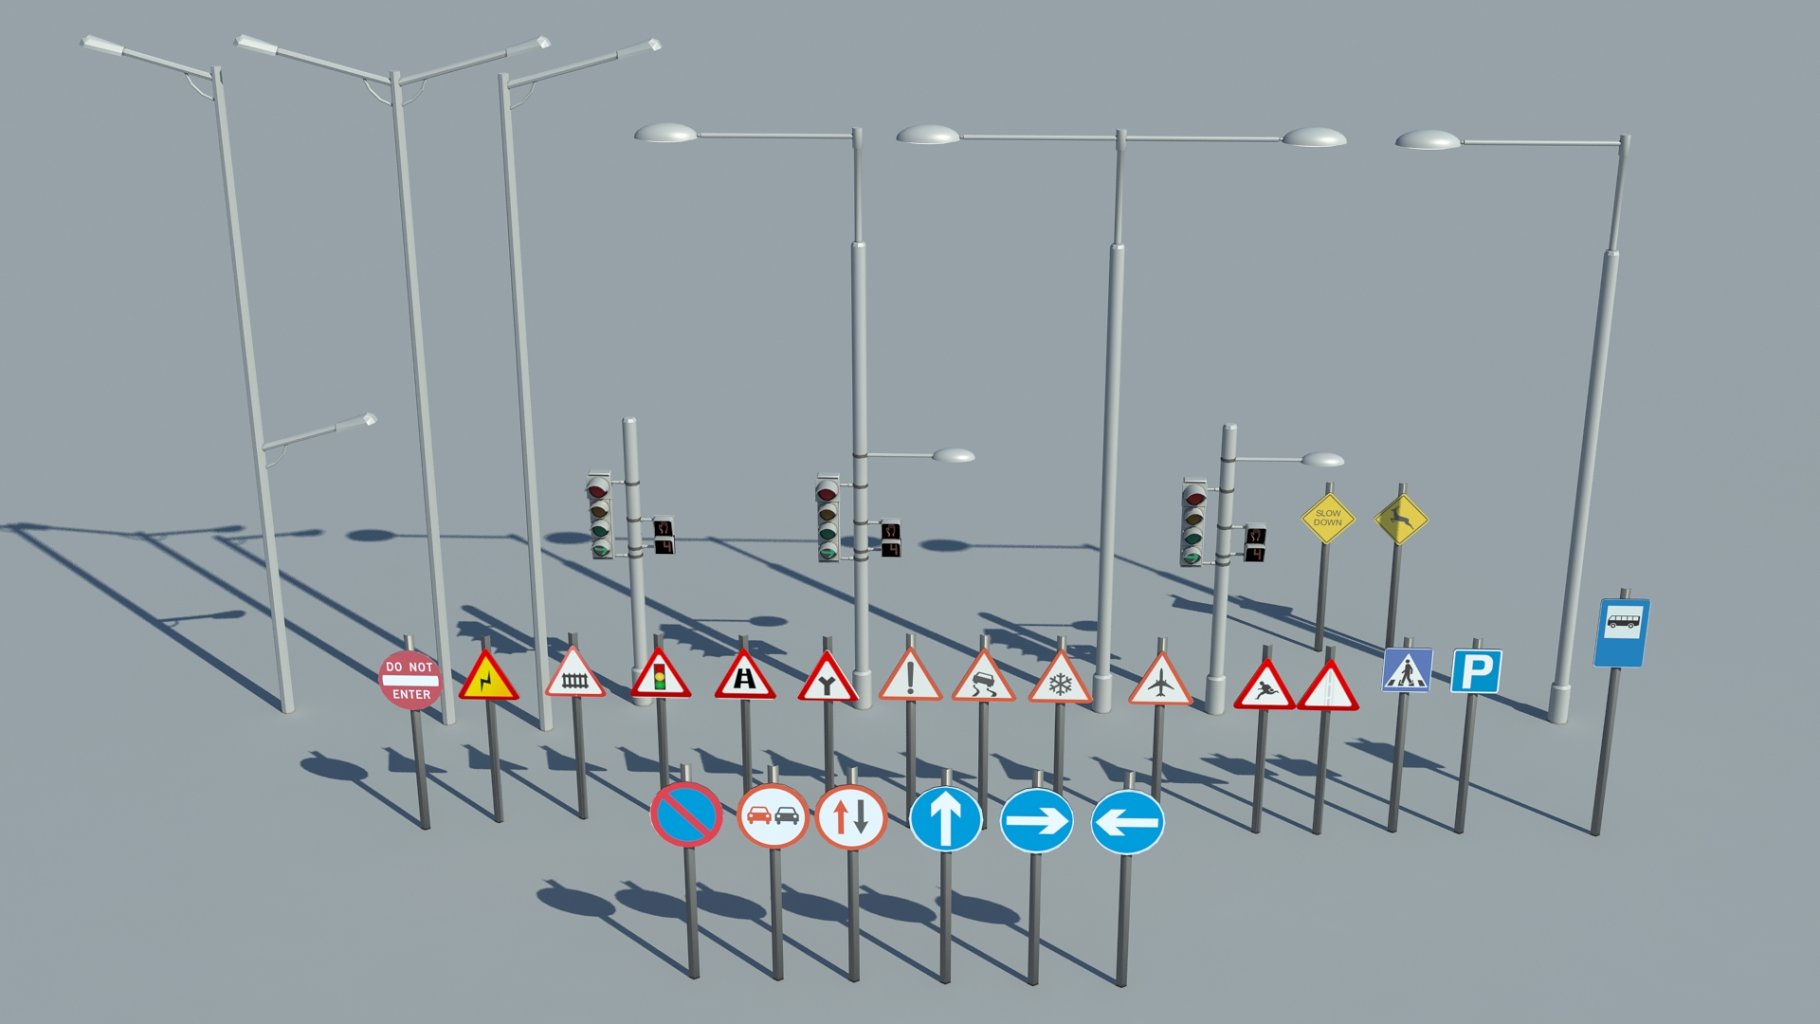 Rendering an irresistible low poly 3d model of traffic signs